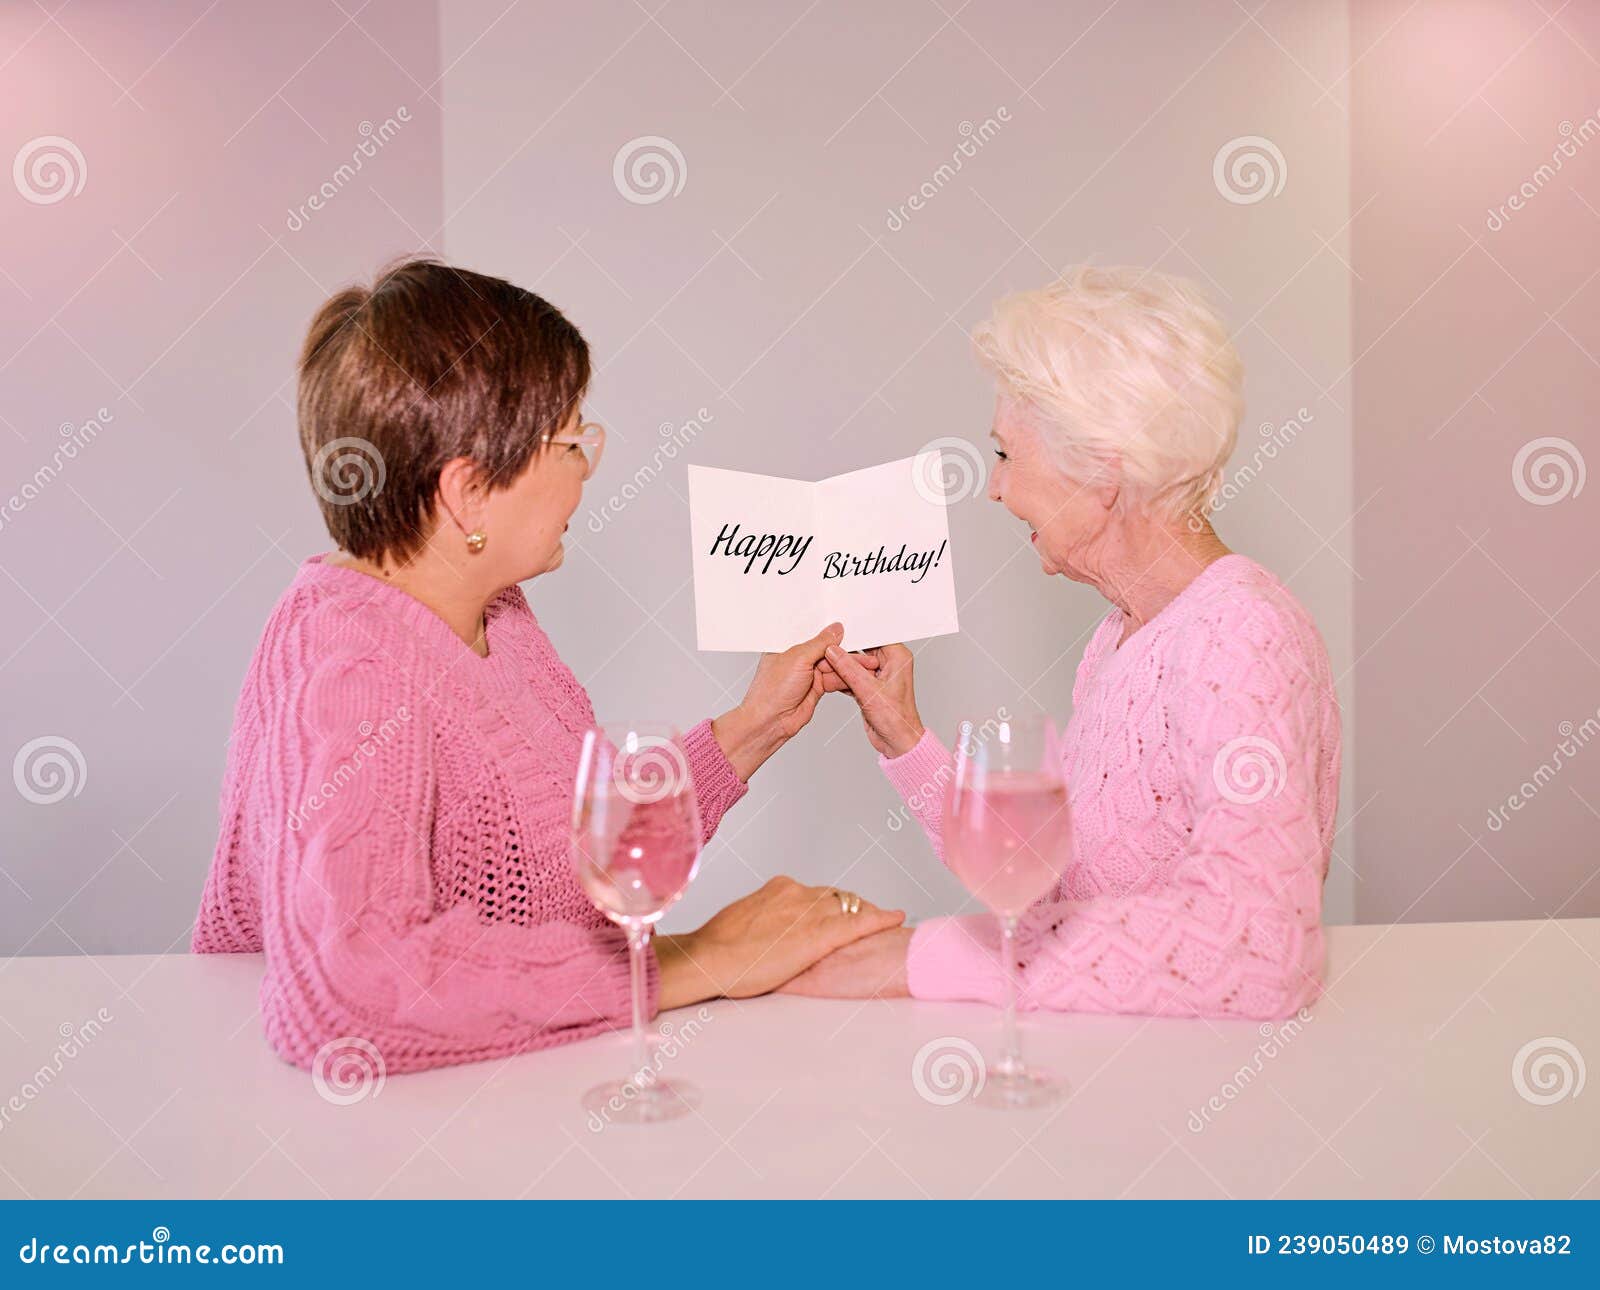 Two Mature Women Drinking Wine and Giving a Post Card image